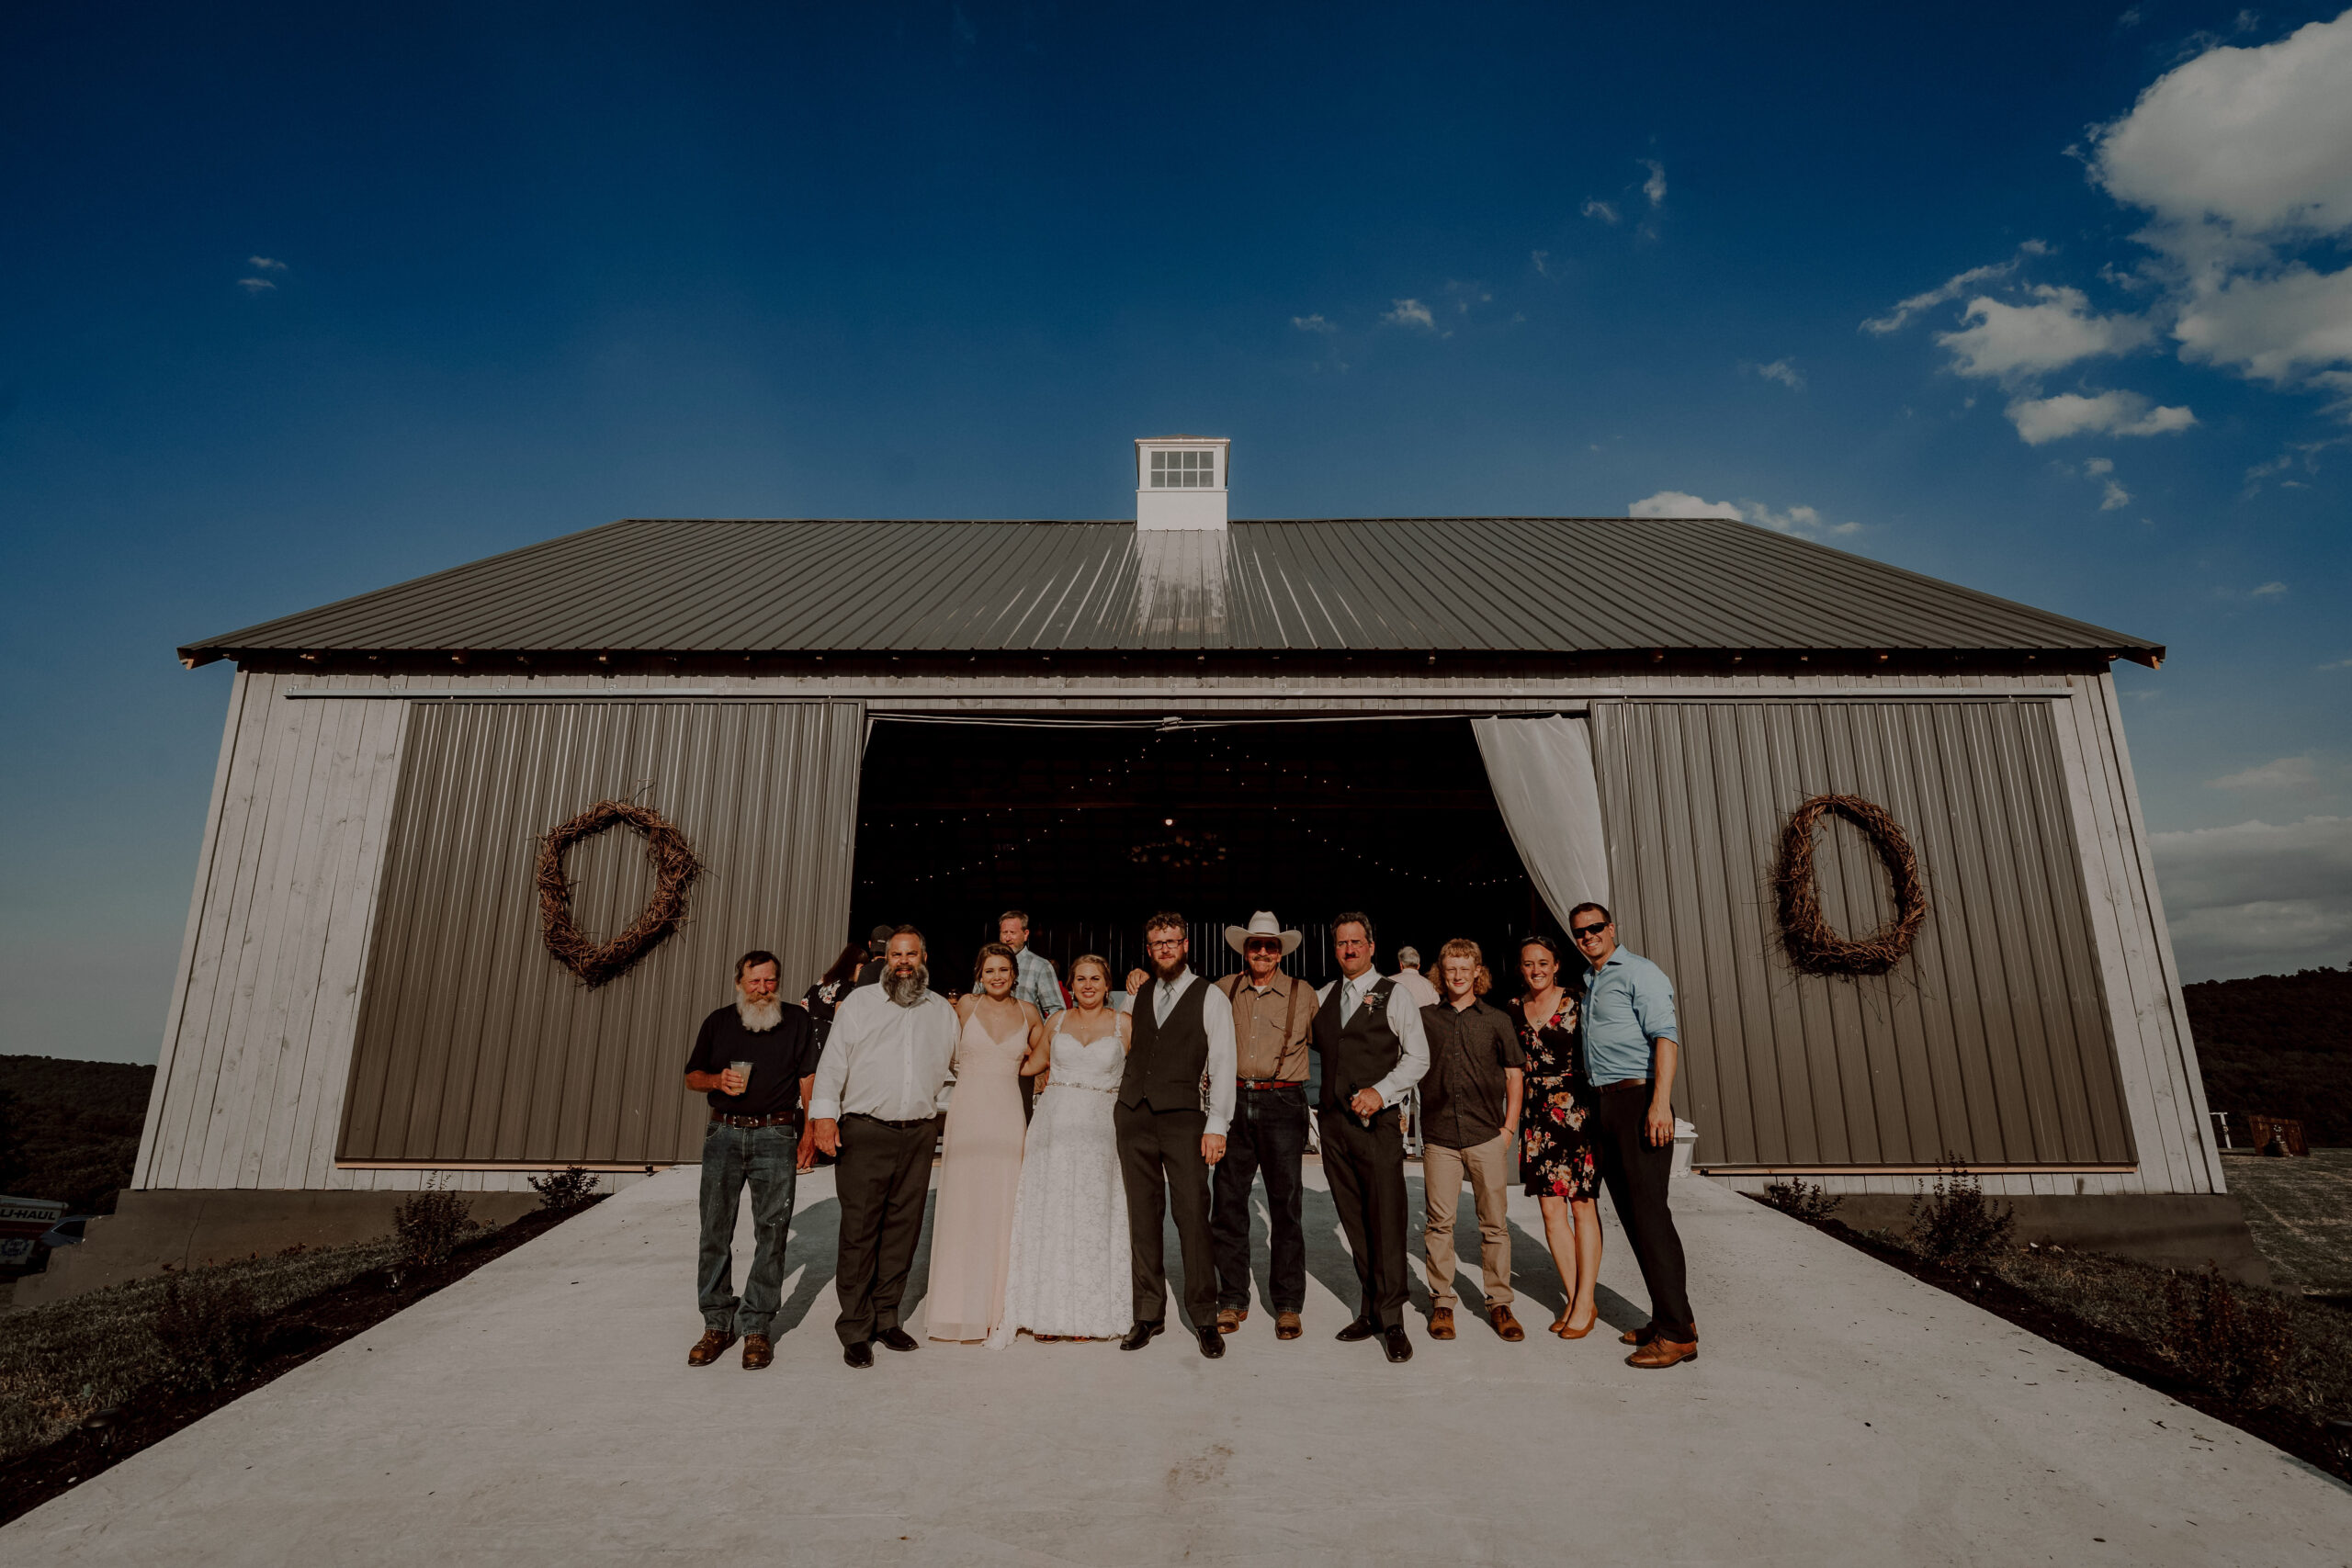 A group of people standing in front of a barn.